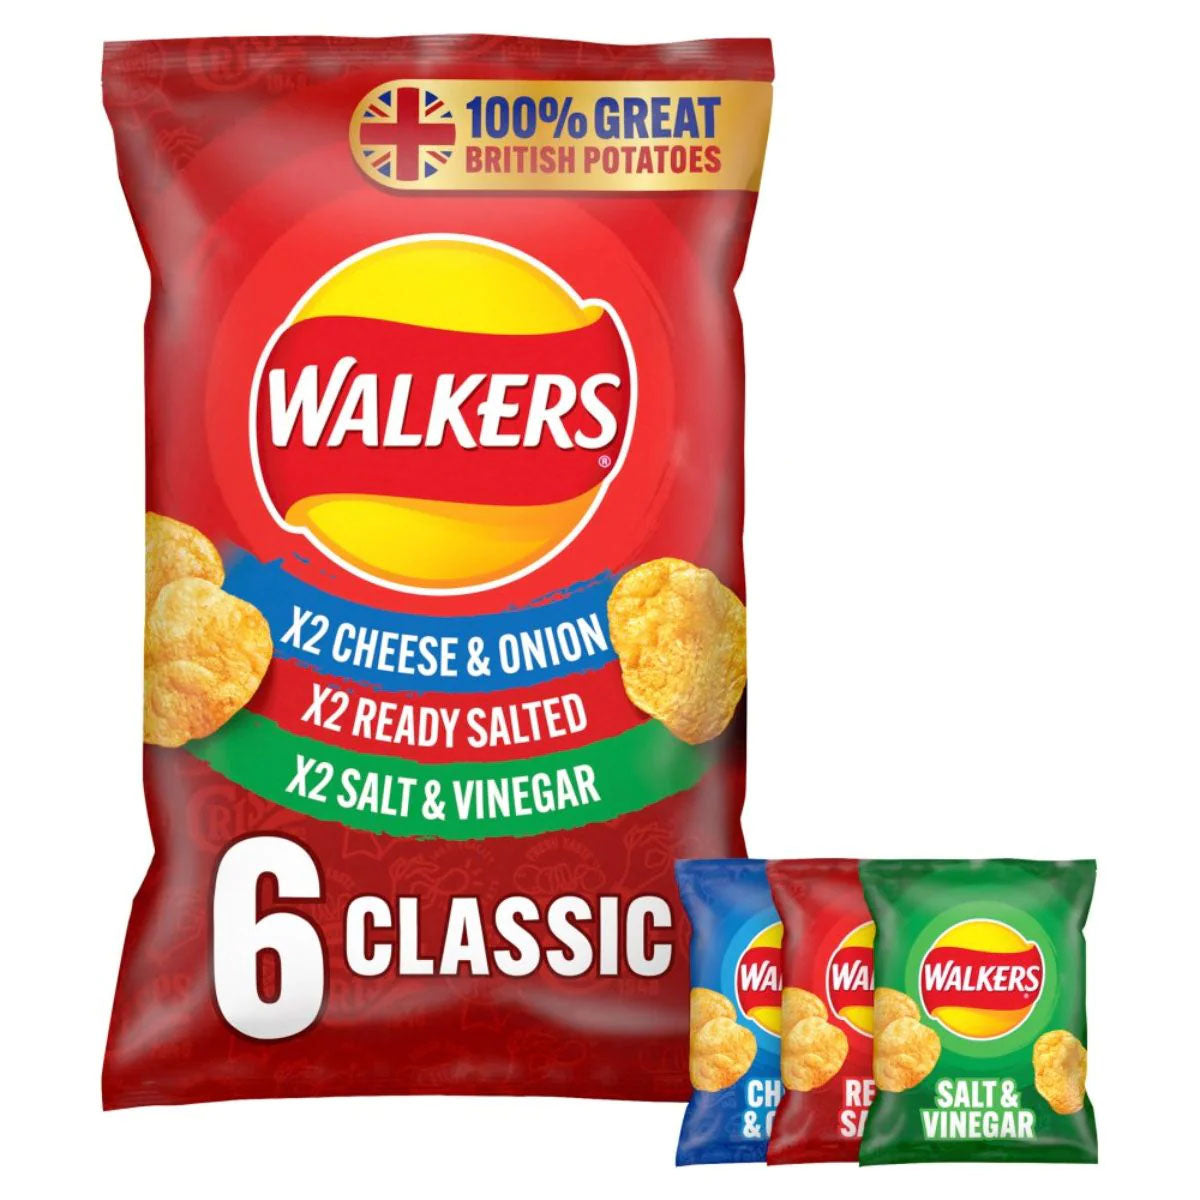 Walkers - Classic Variety Multipack Crisps - 6x25g cheese and onion chips.